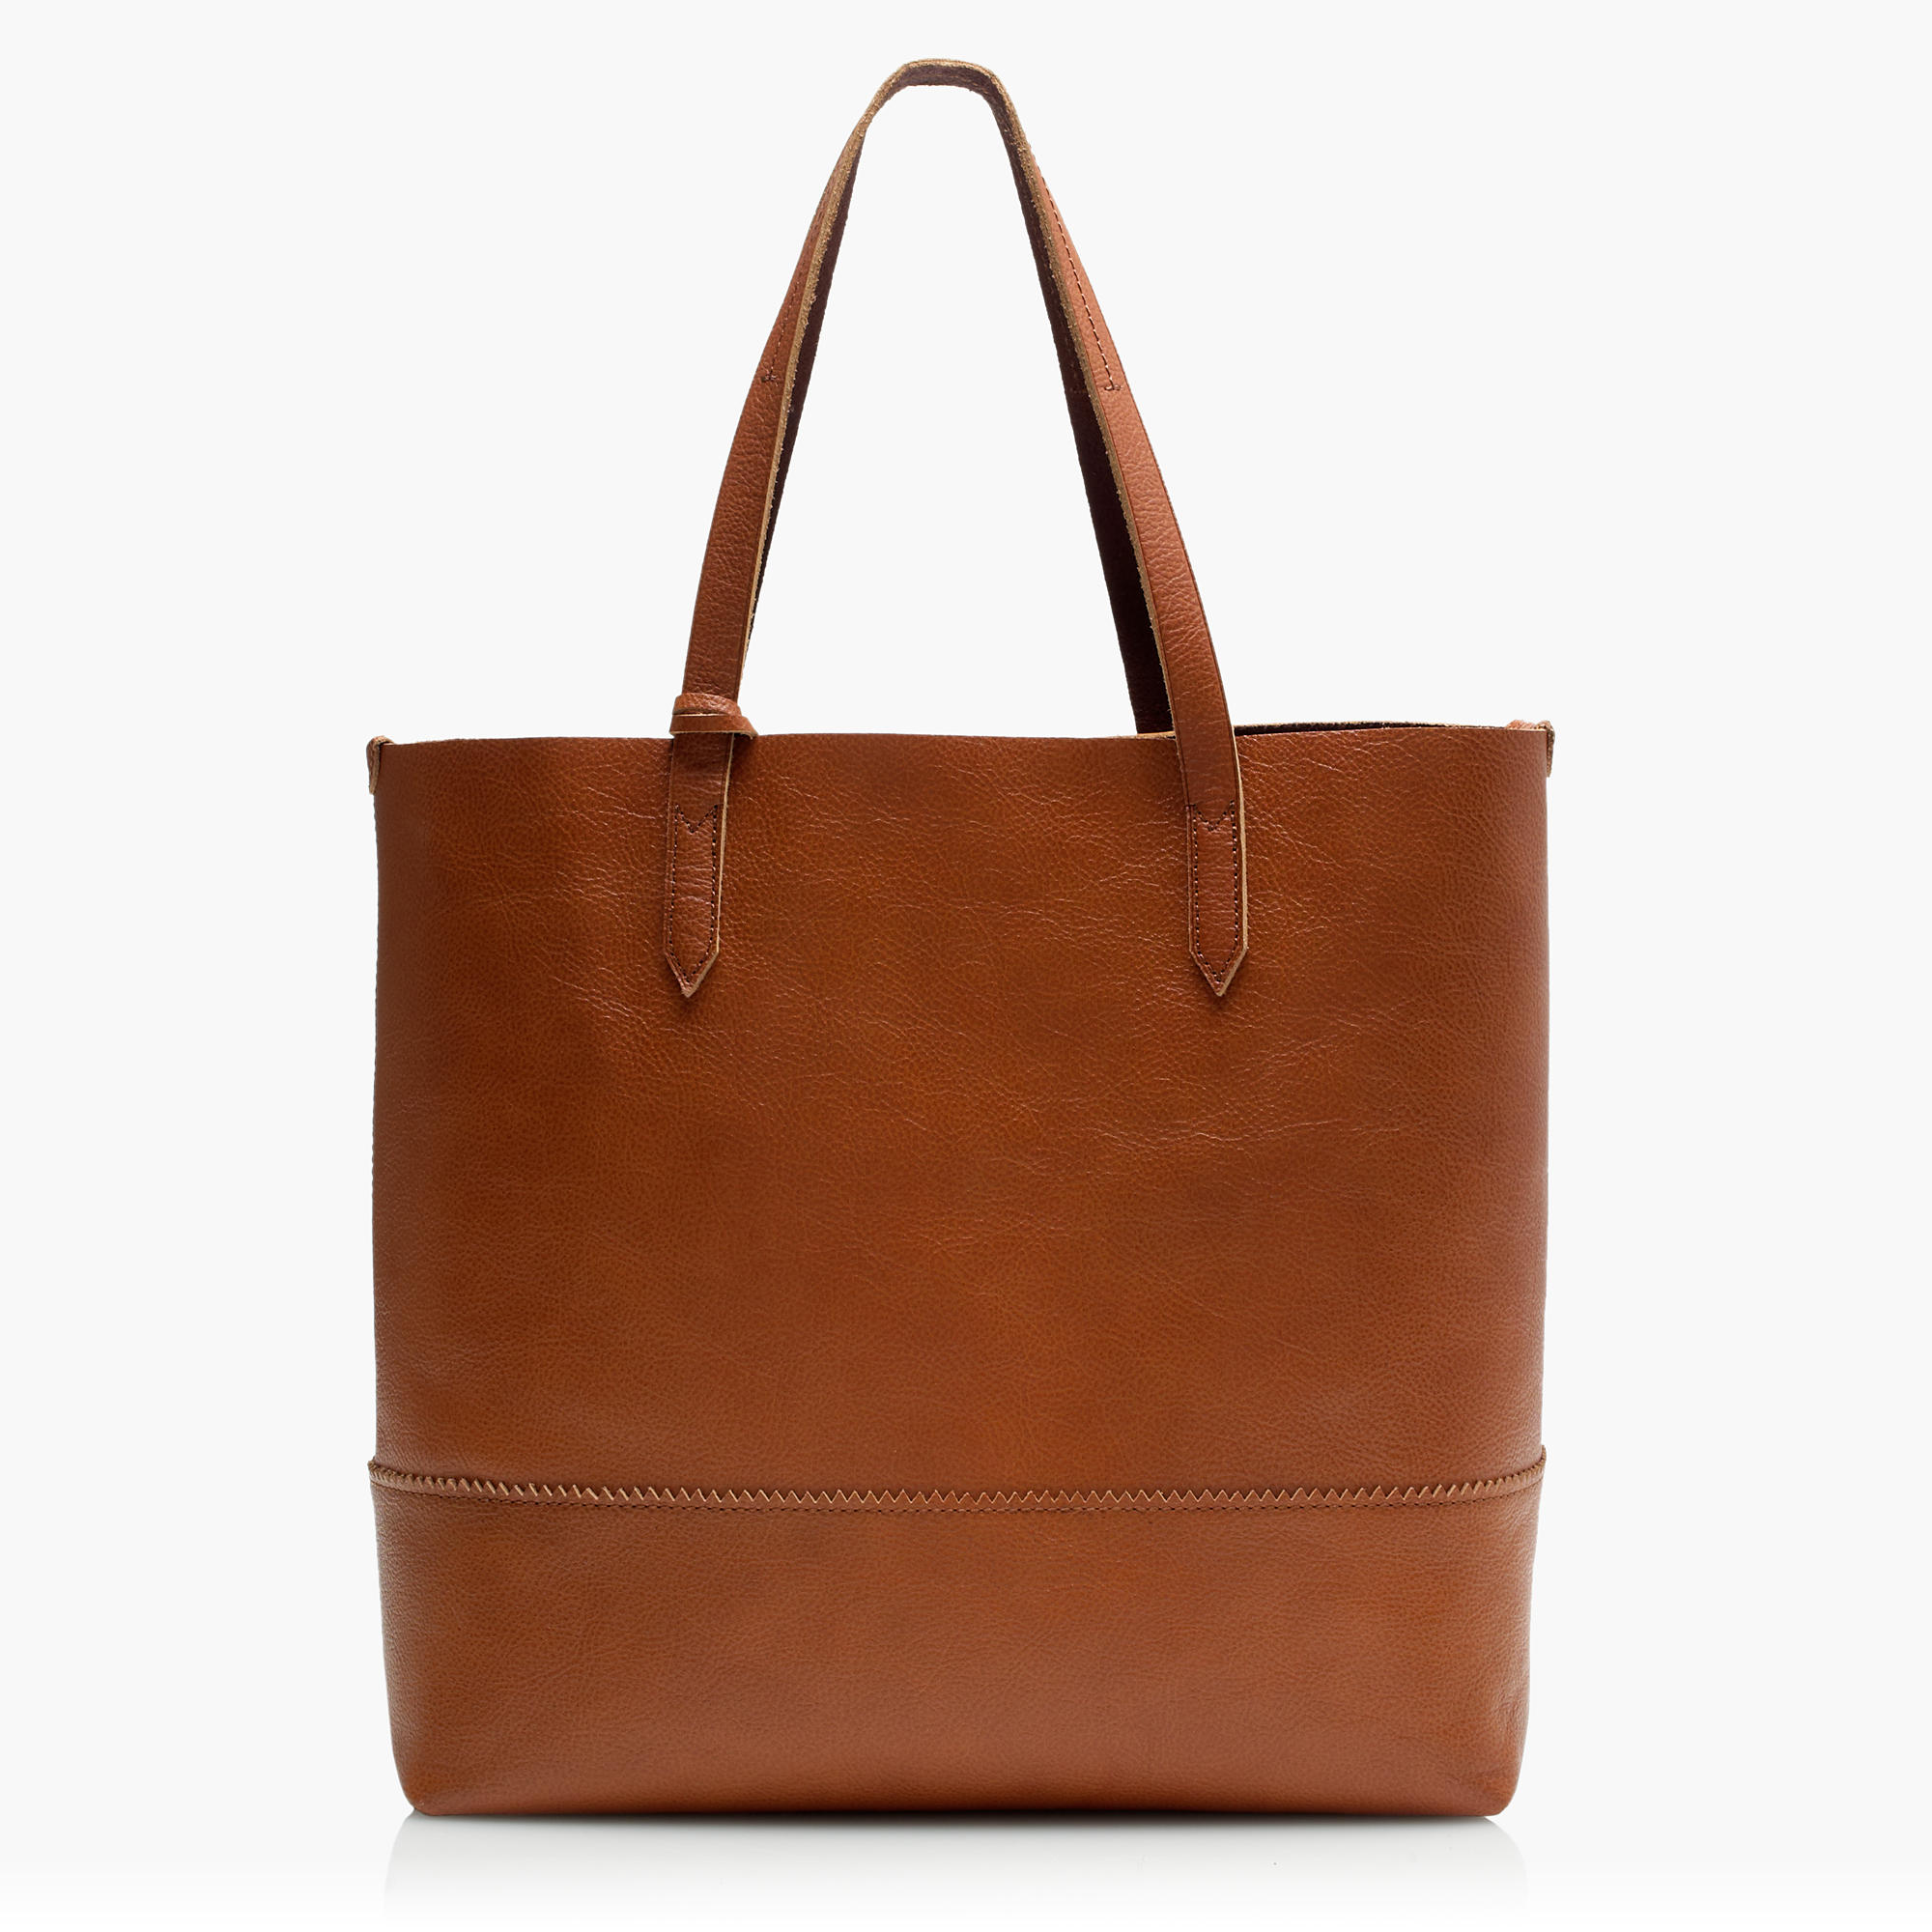 Downing tote : | J.Crew